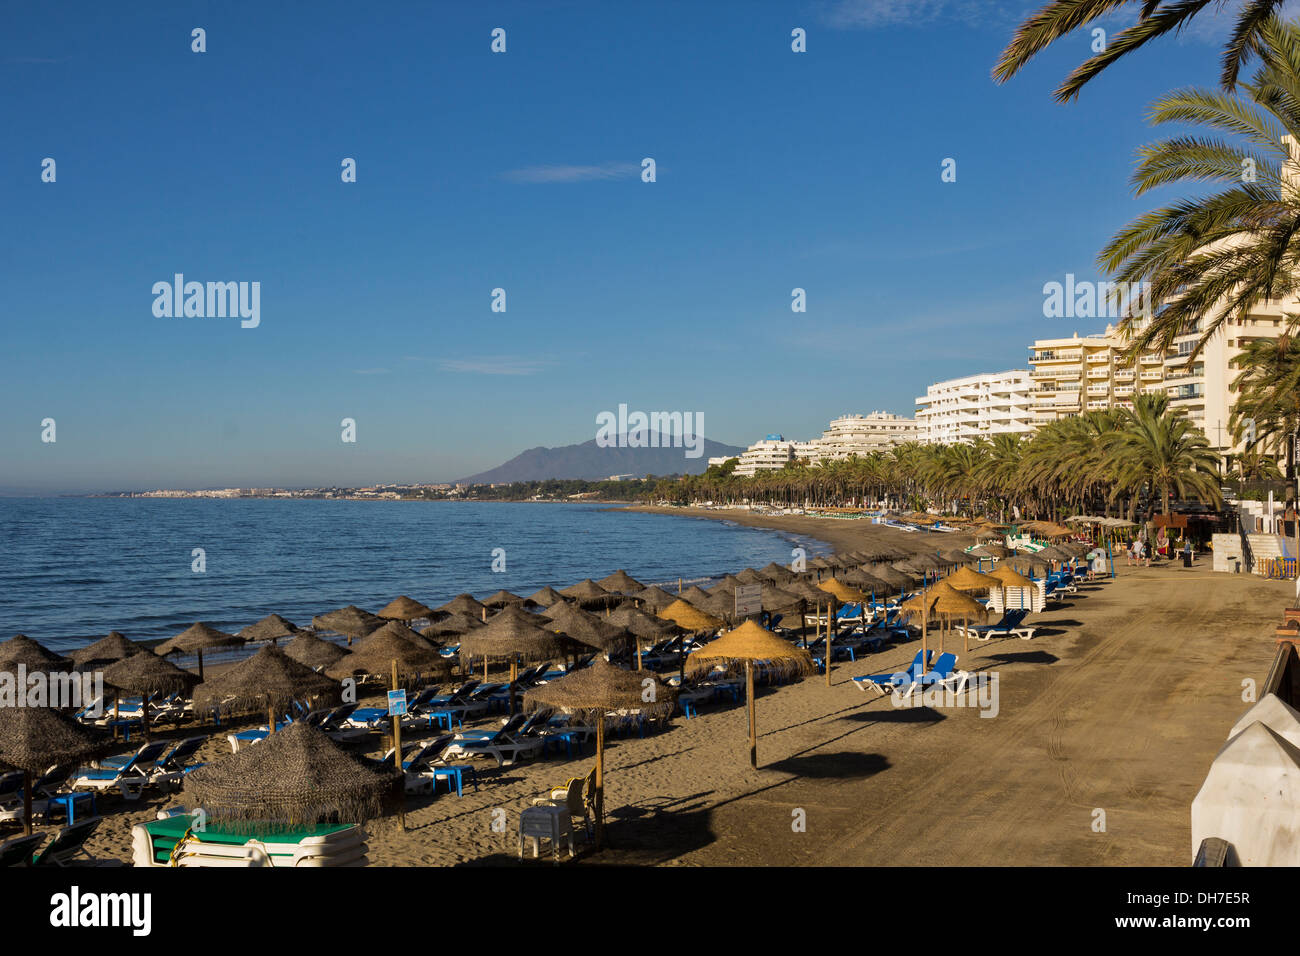 MARBELLA WITH A SWEEPING VIEW OF THE BEACHFRONT AND SEA Stock Photo